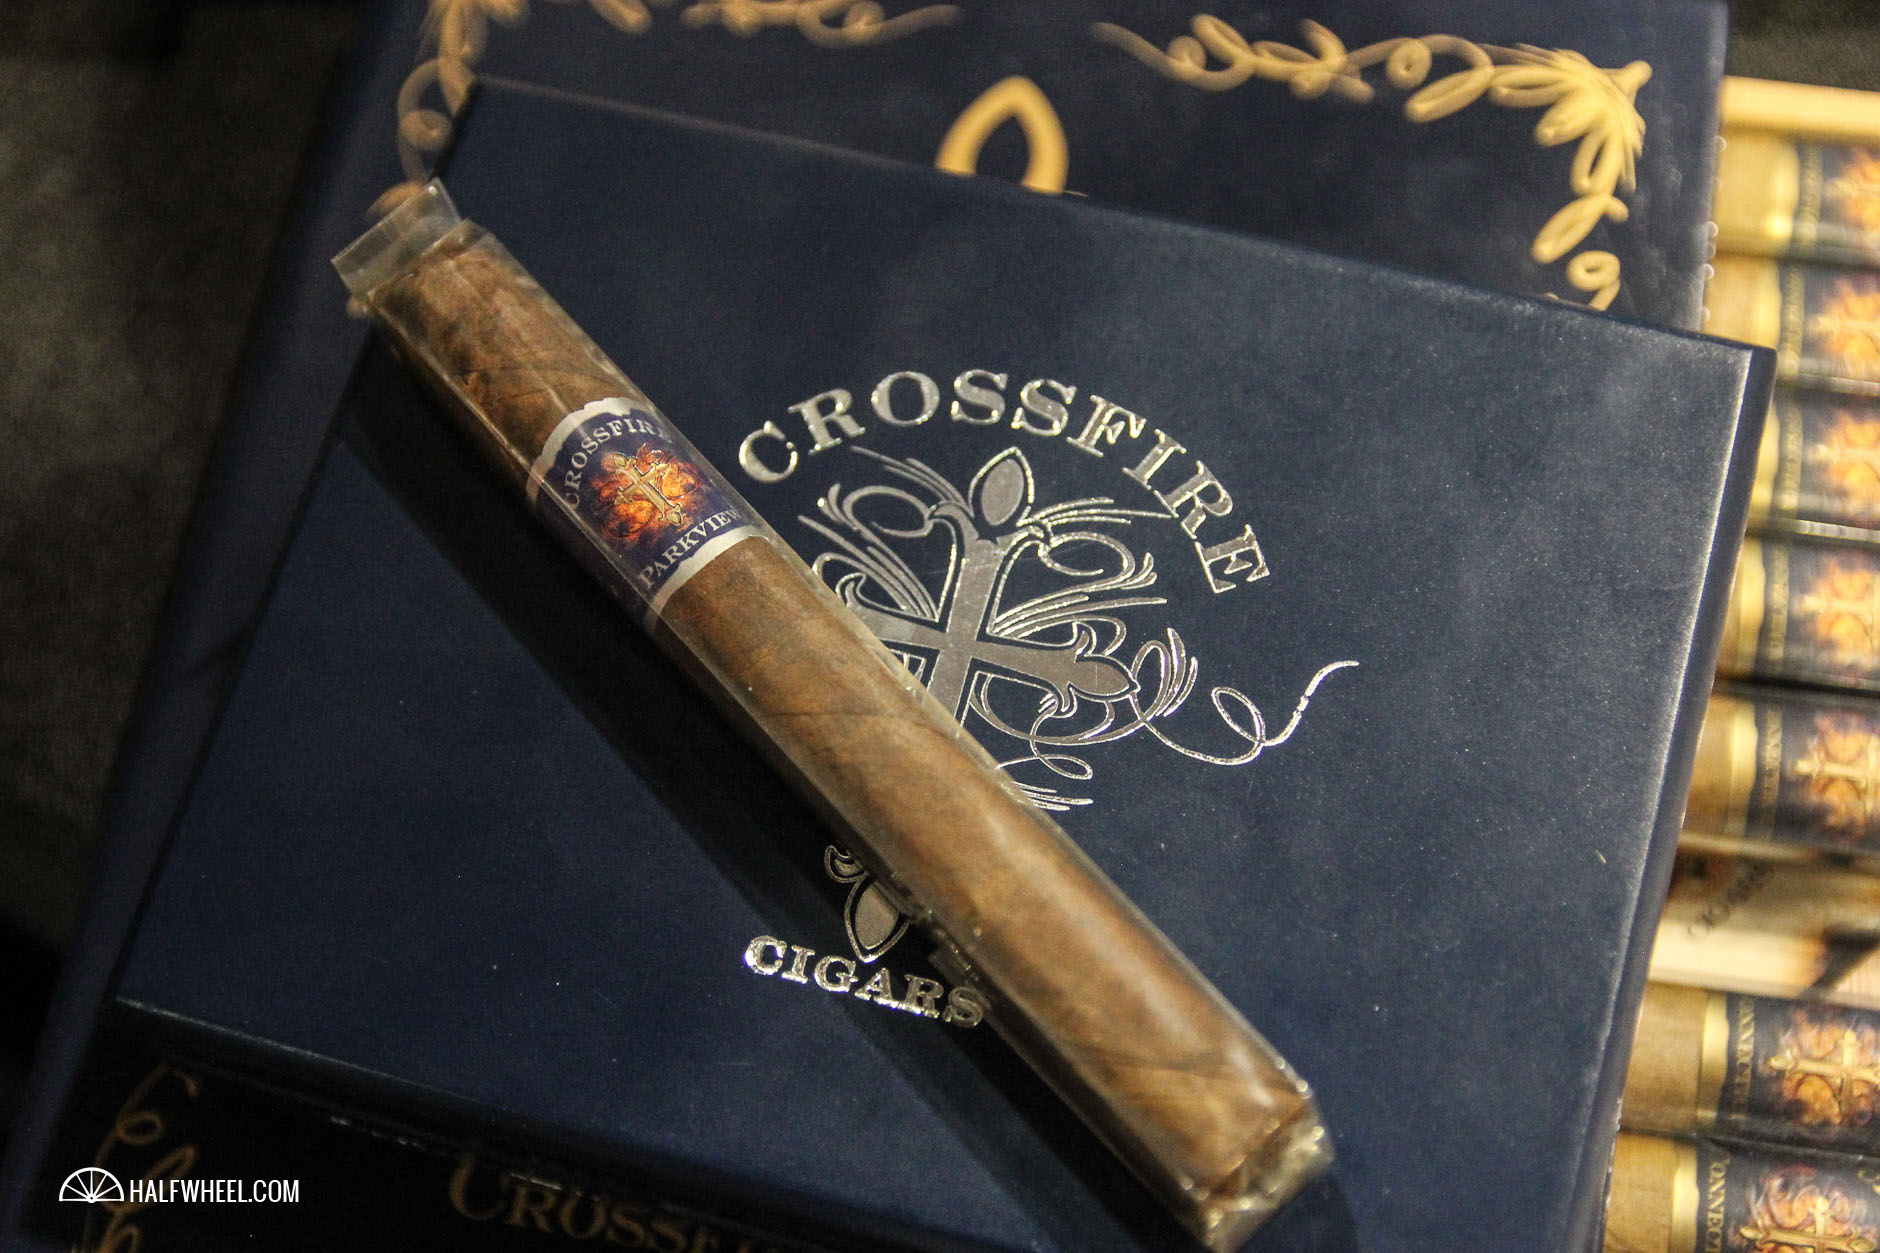 Crossfire Cigars Parkview IPCPR 2016